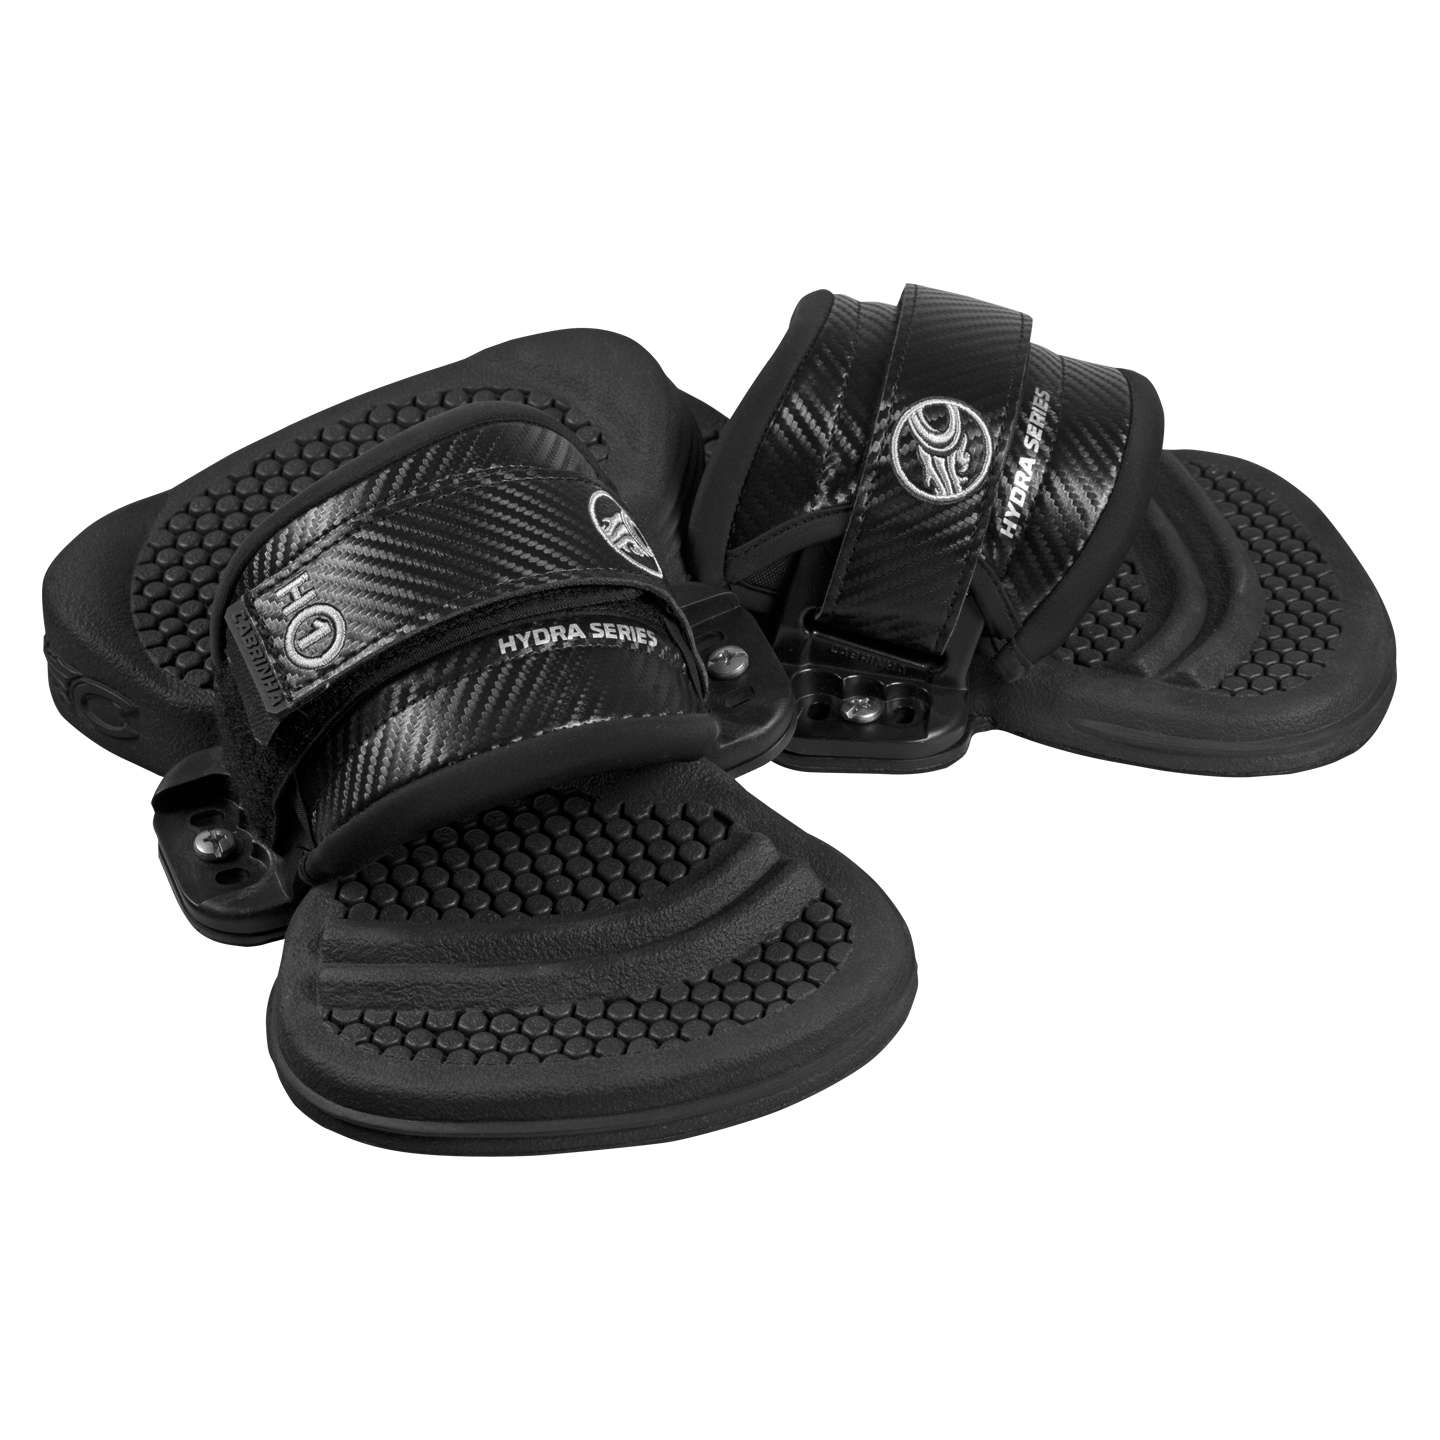 Cabrinha Hydra H1 2016 Foot Straps | King of Watersports